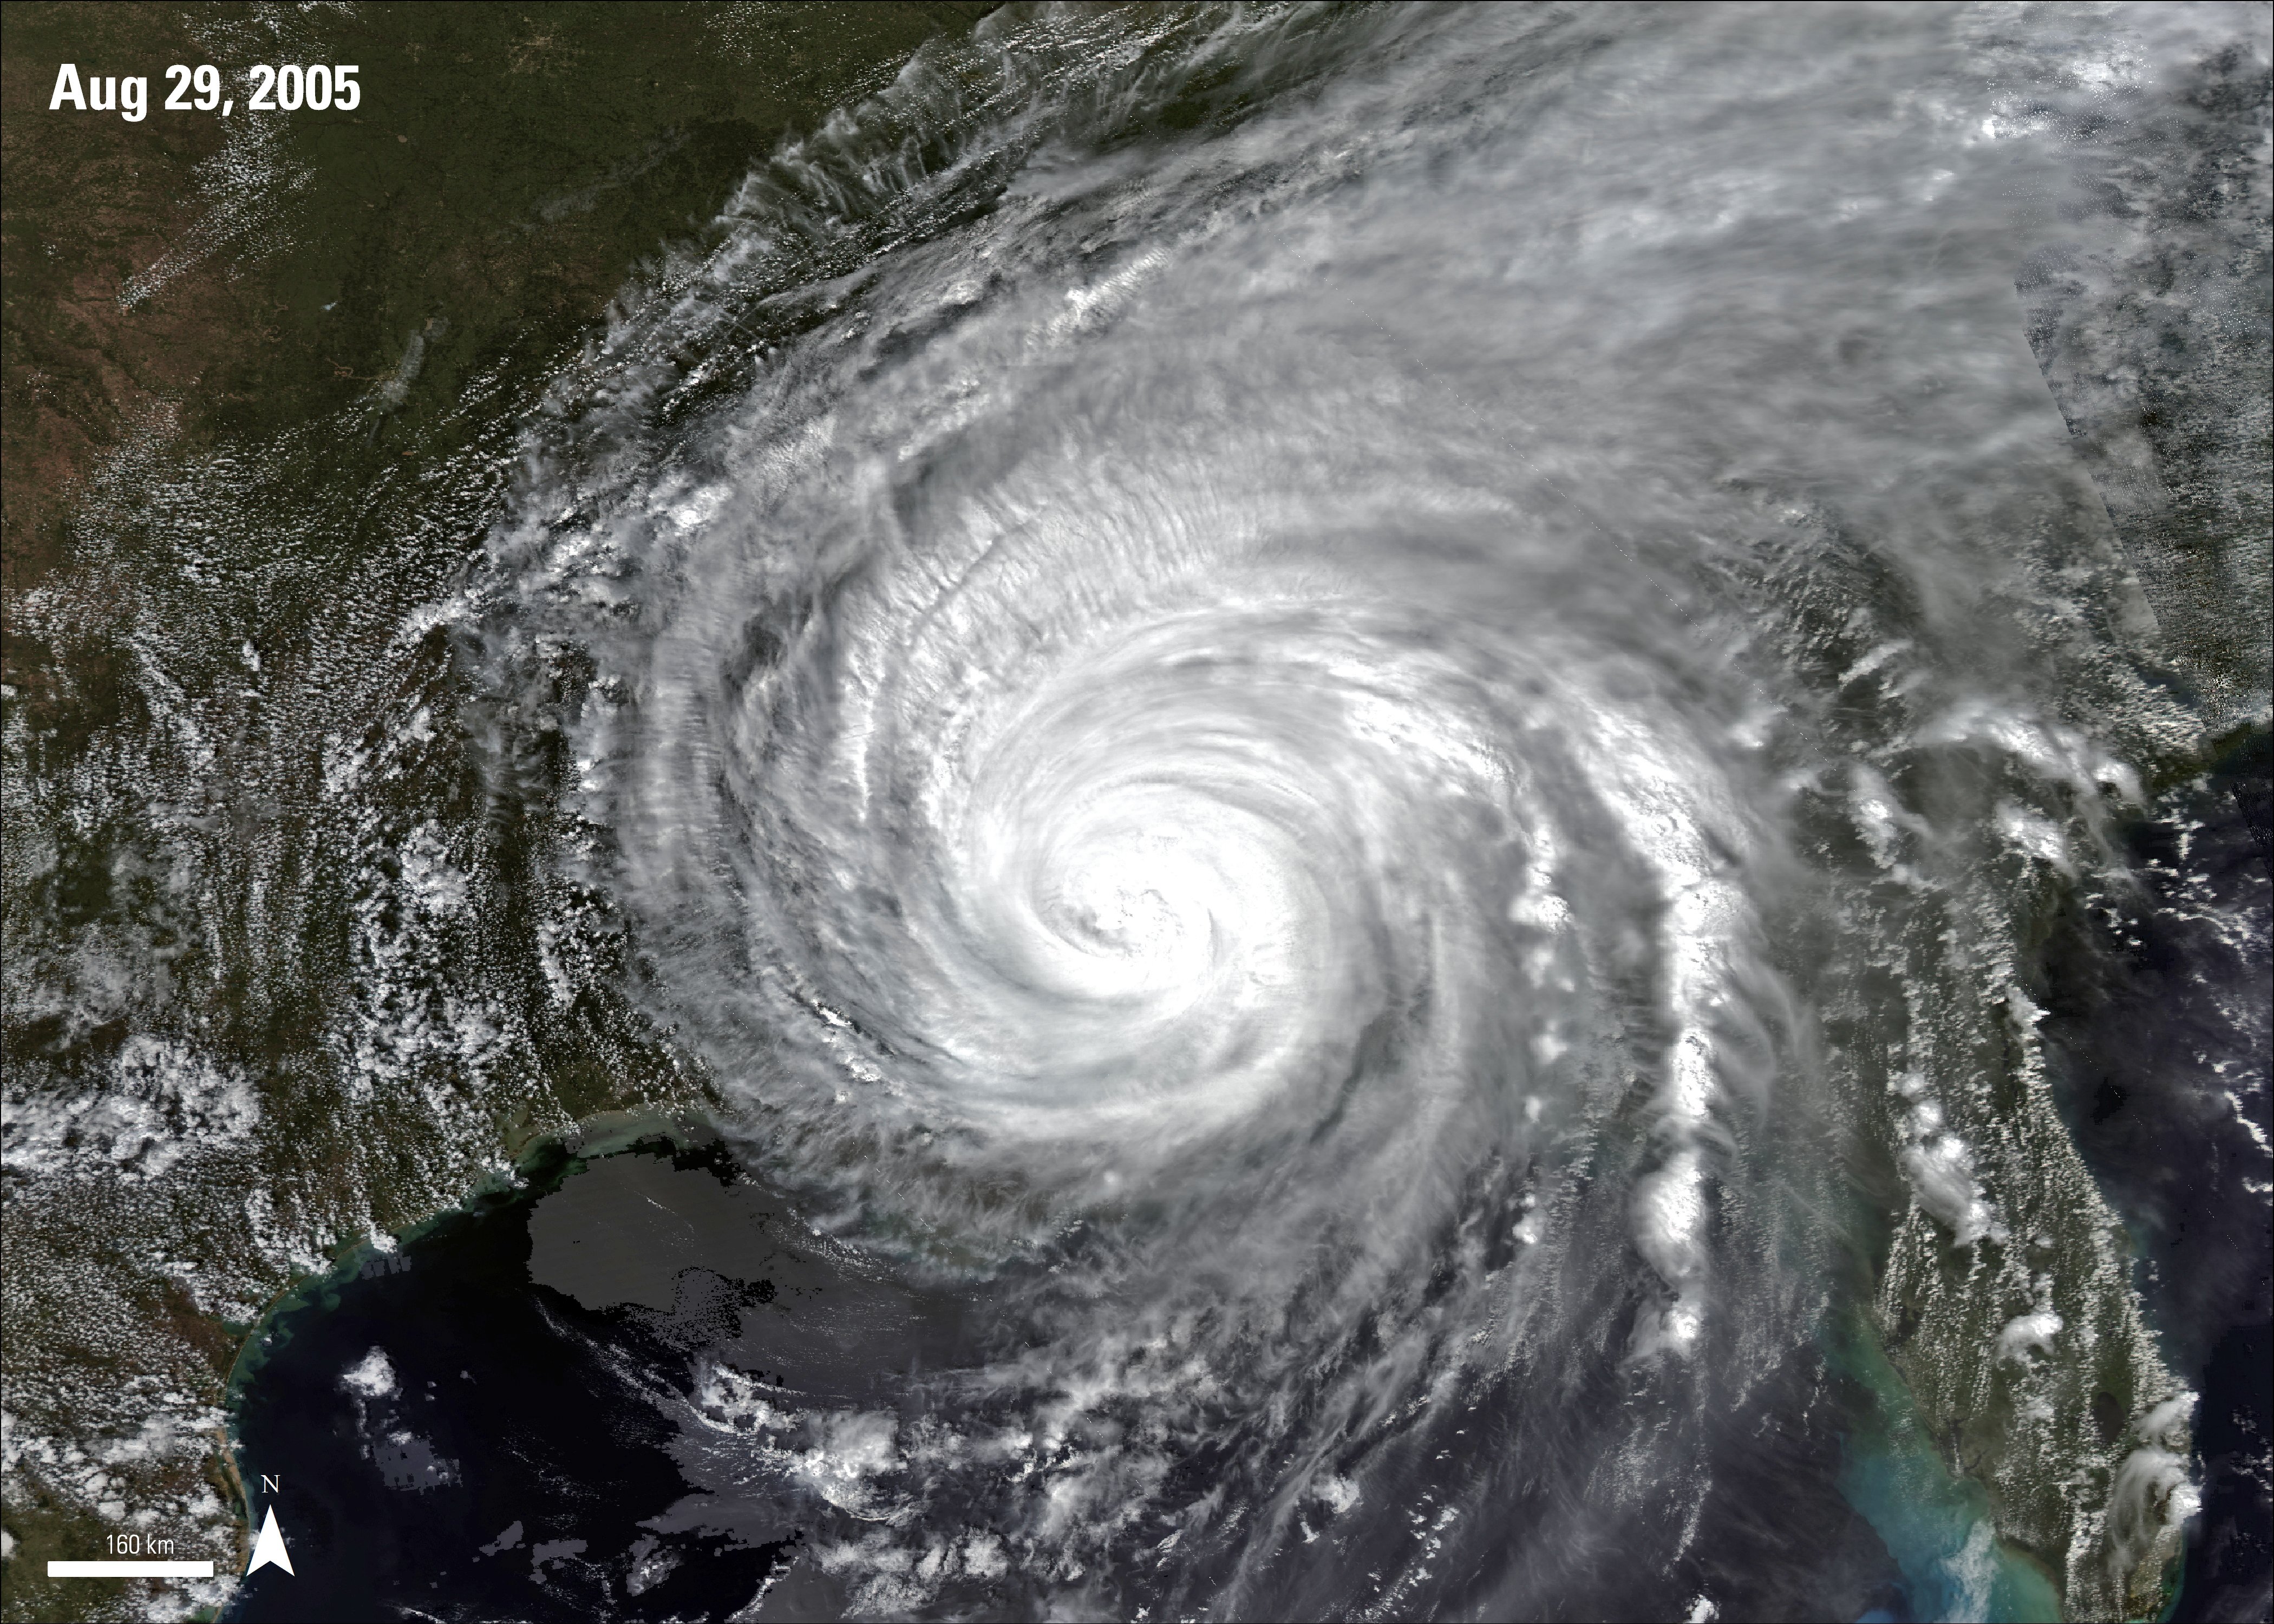 MODIS surface reflectance imagery over Hurricane Katrina, acquired August 29, 2005.